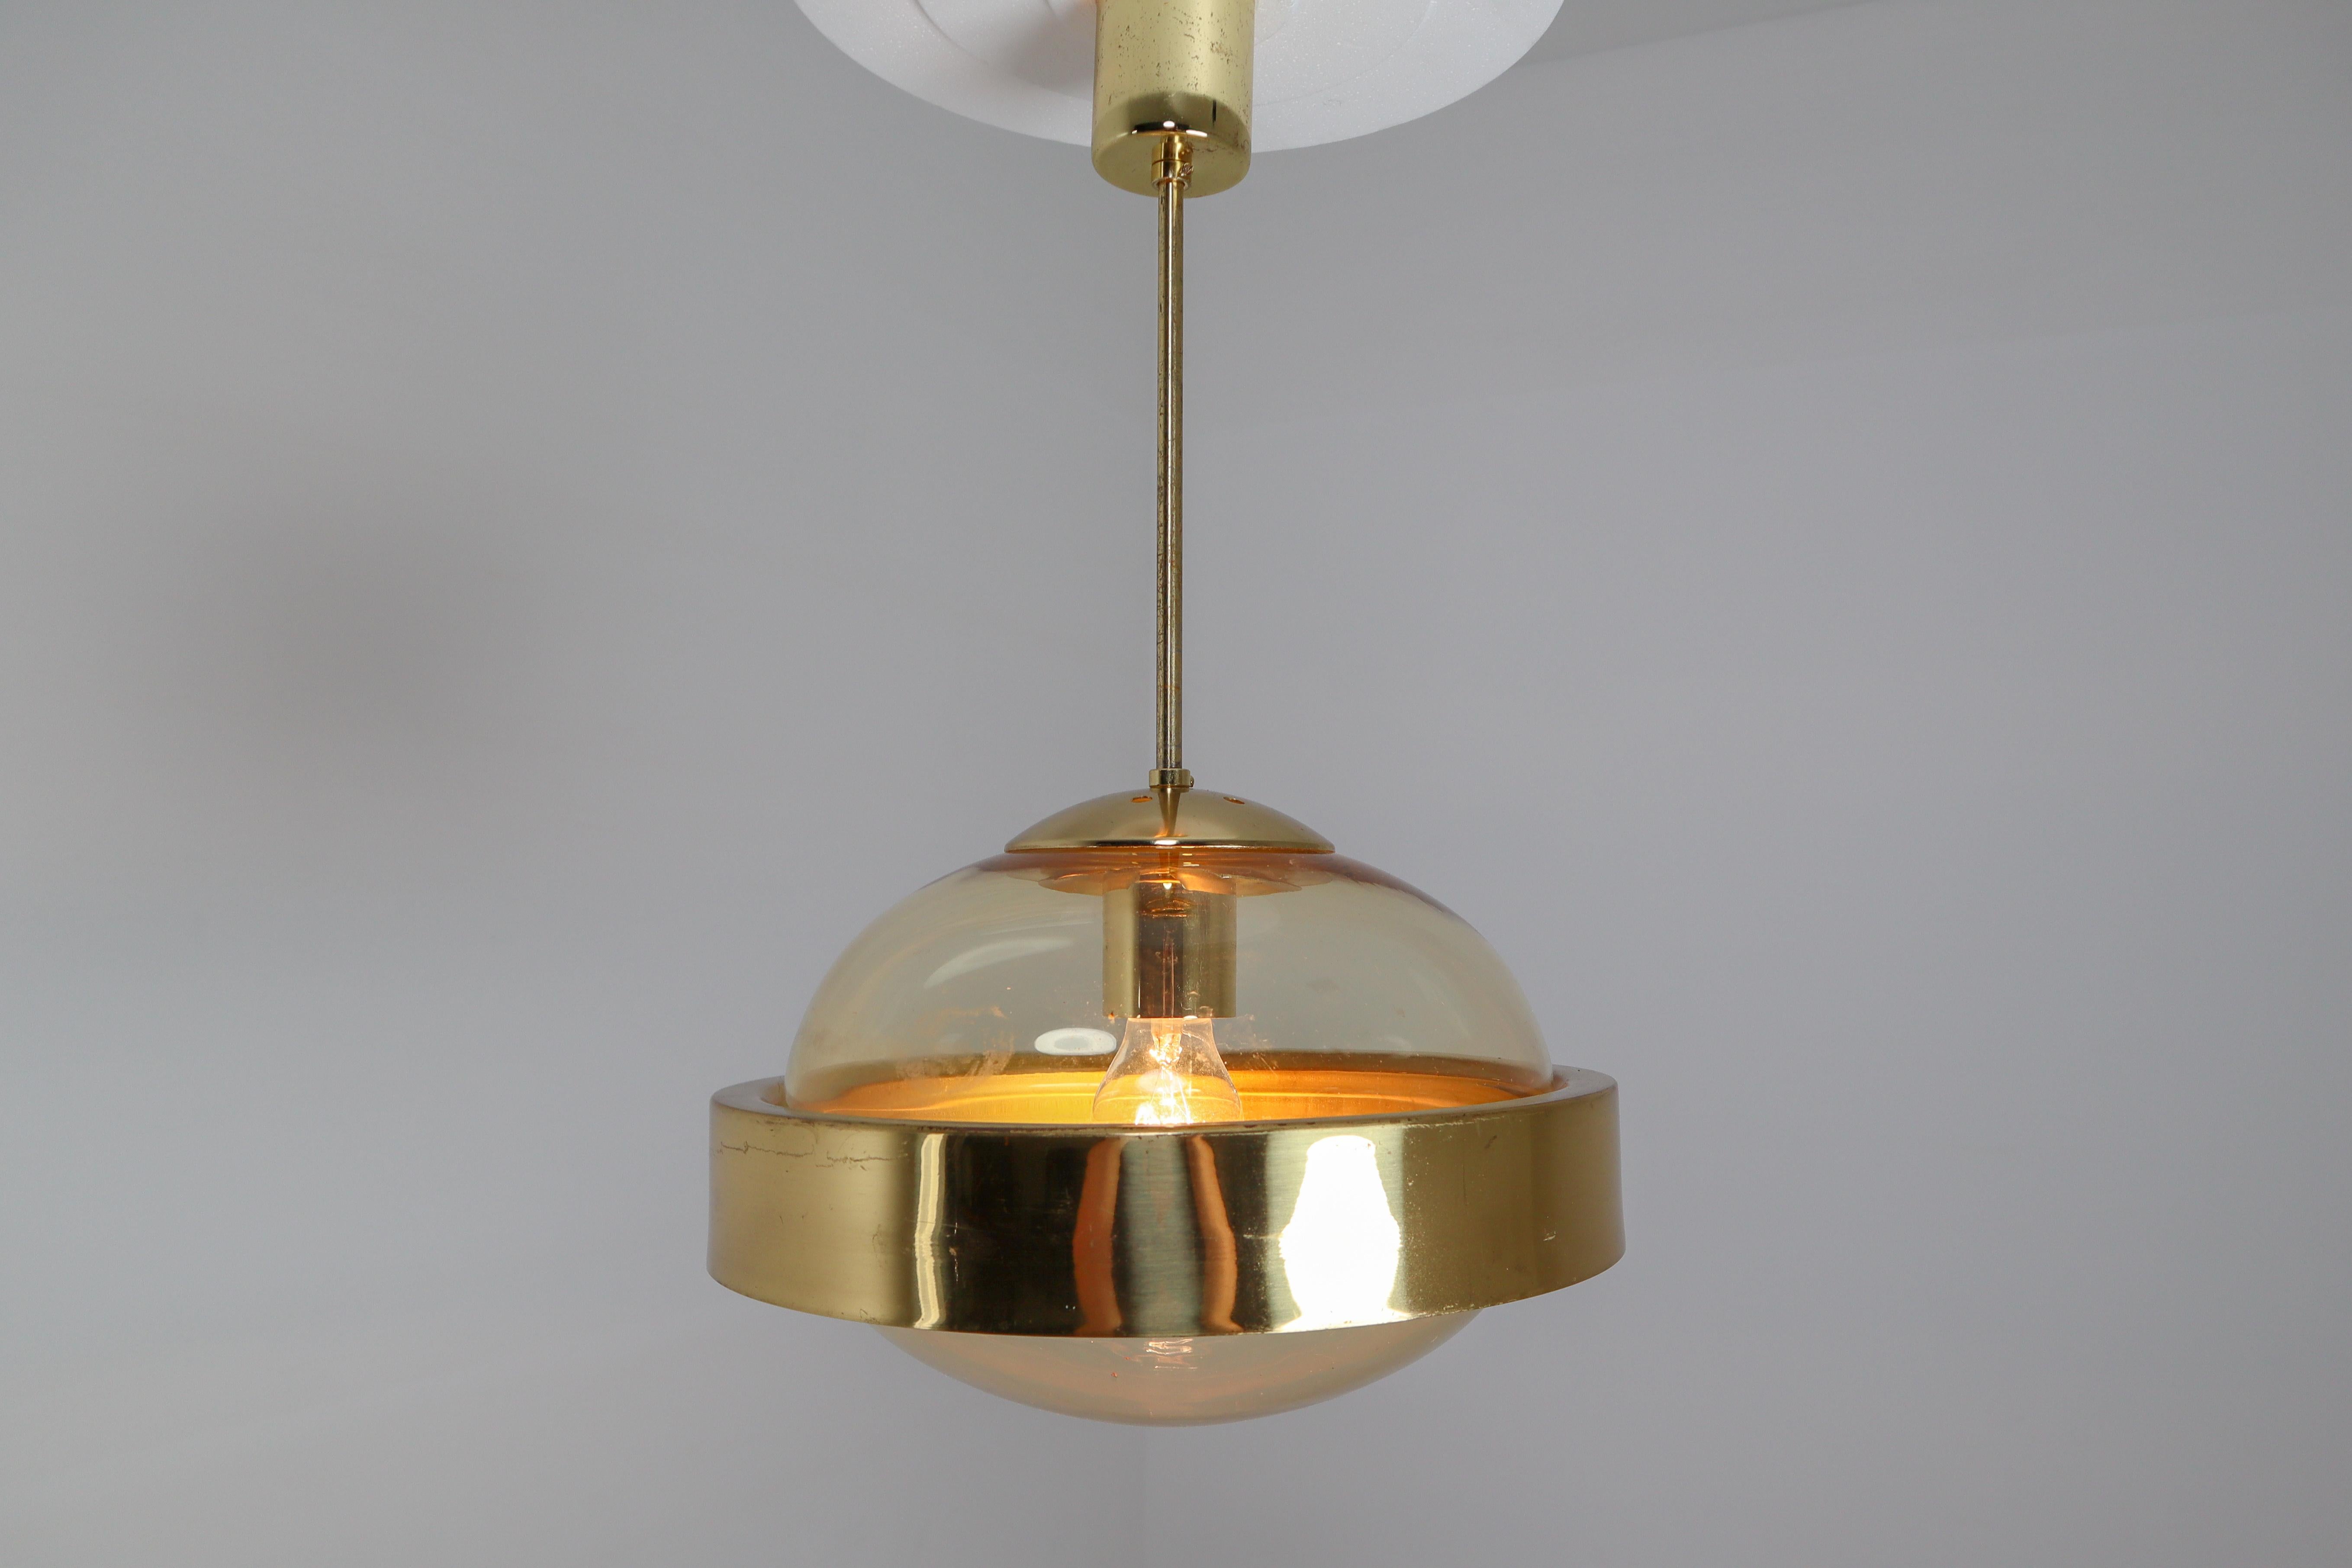 Mid-Century Modernist brass and hand-blowed glass pendant, 1960s. The hand blown glass globe have a amber tint to them and contain air bubbles of varying sizes and density that create a wonderful light effect. This pendant will contribute to a